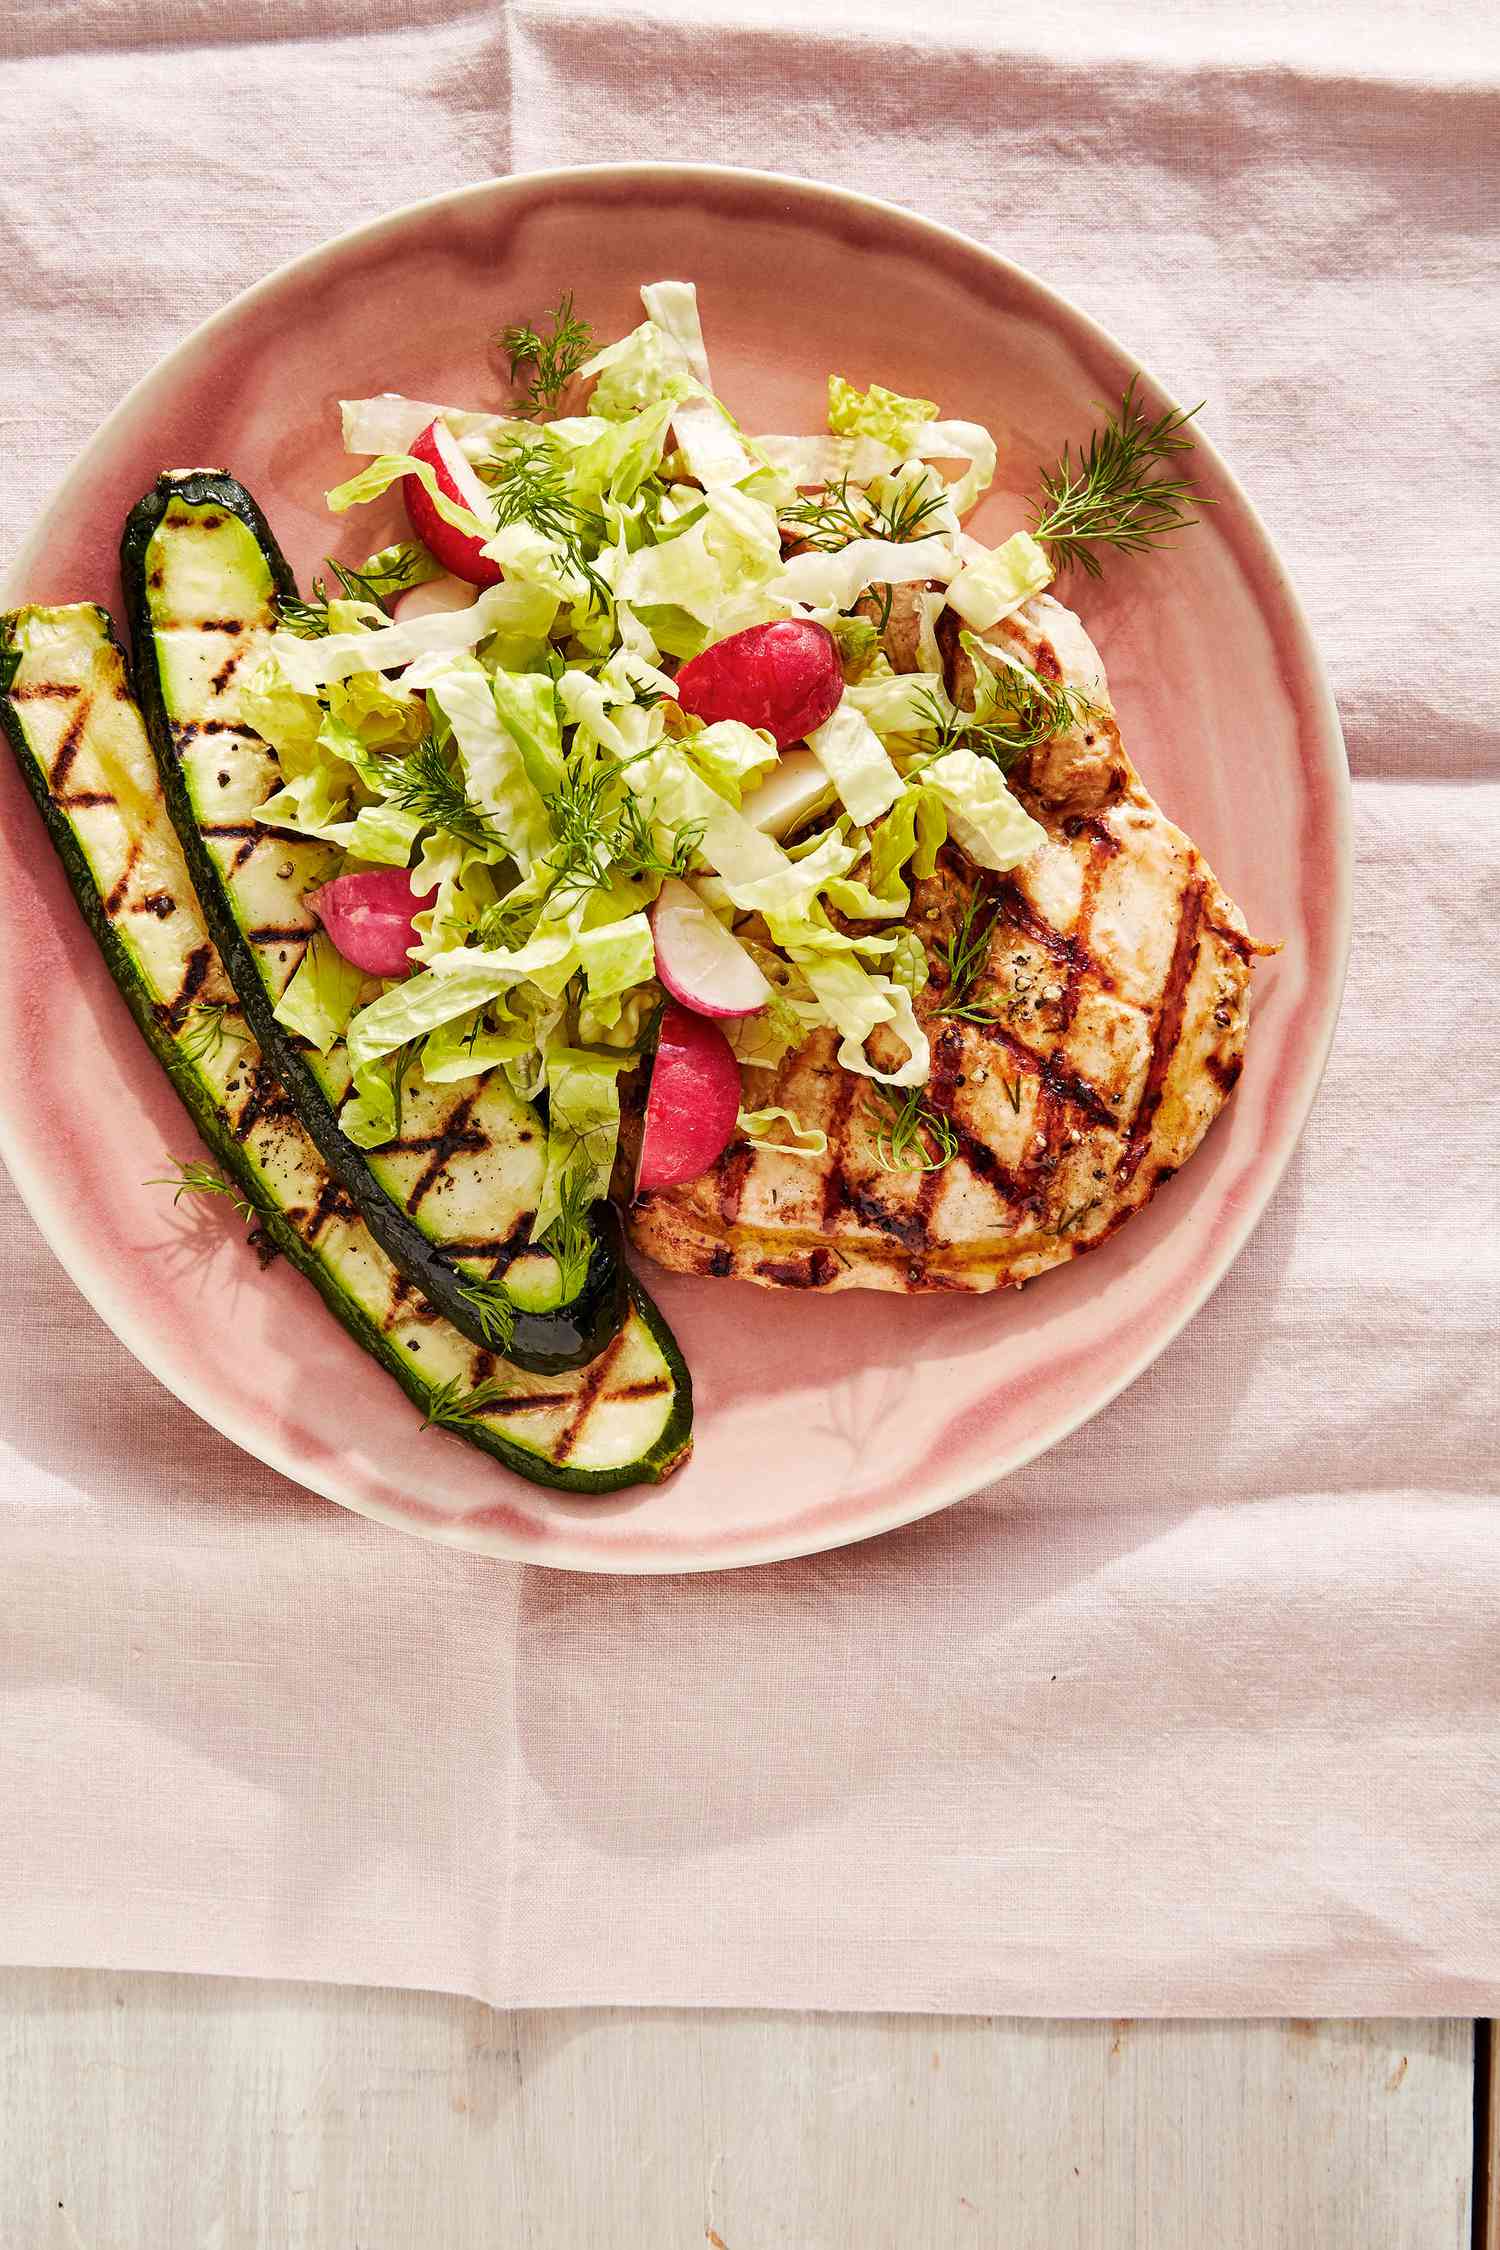 Grilled-Chicken-and-Zucchini Salad recipe